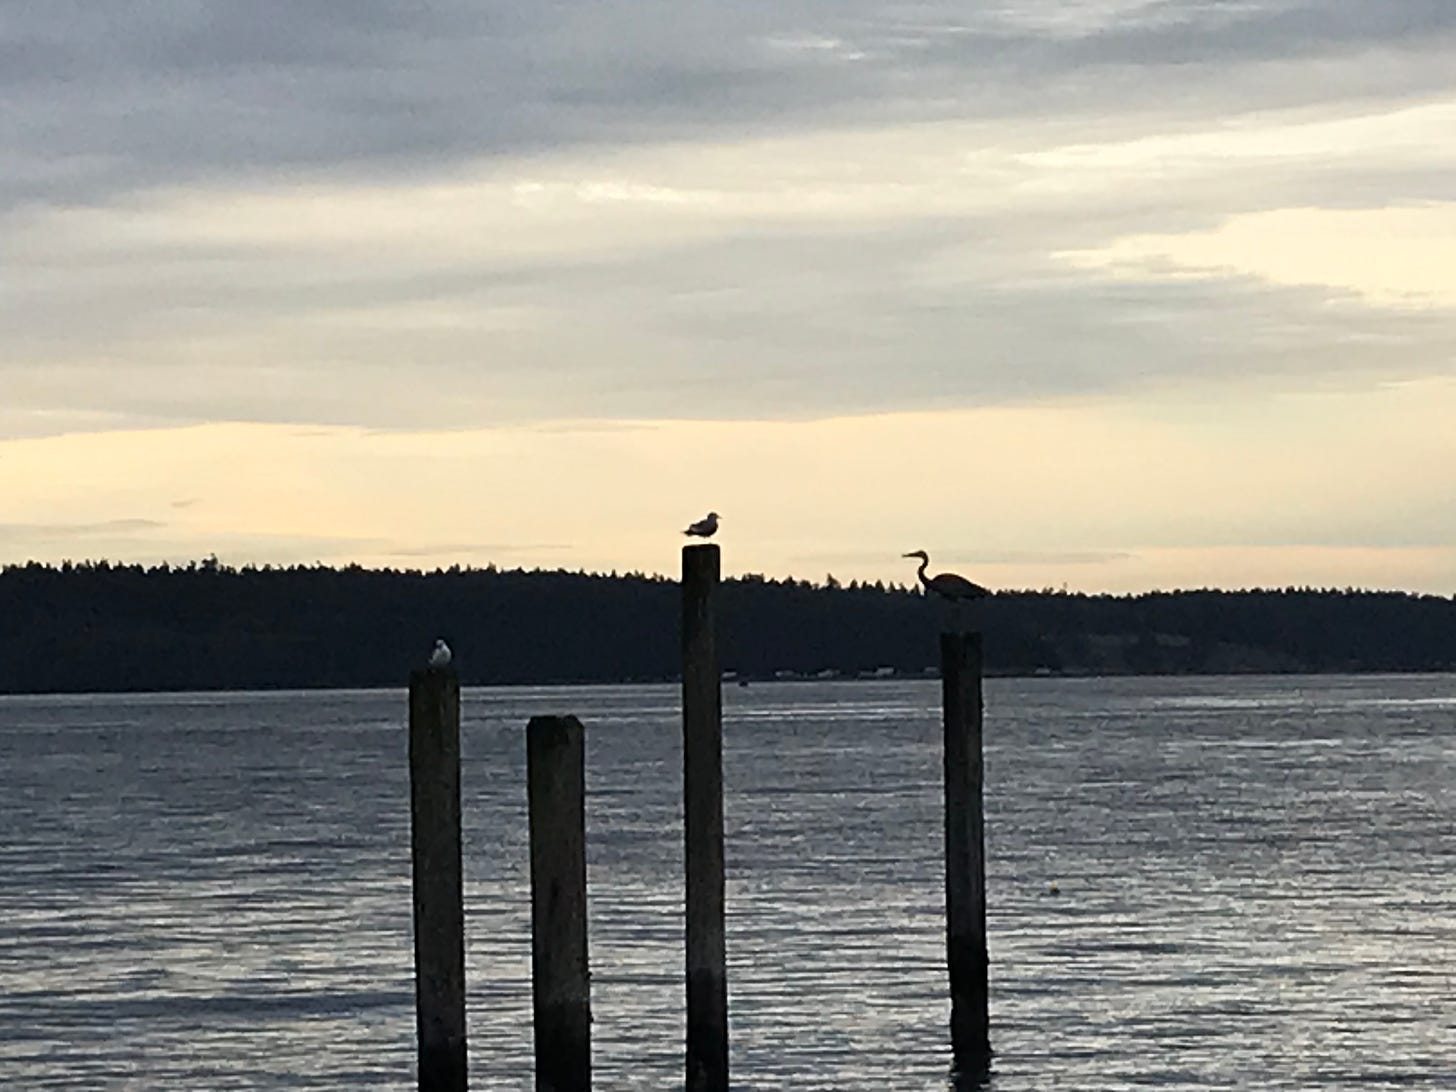 Picture of three birds sitting on poles over water with cloudy sky